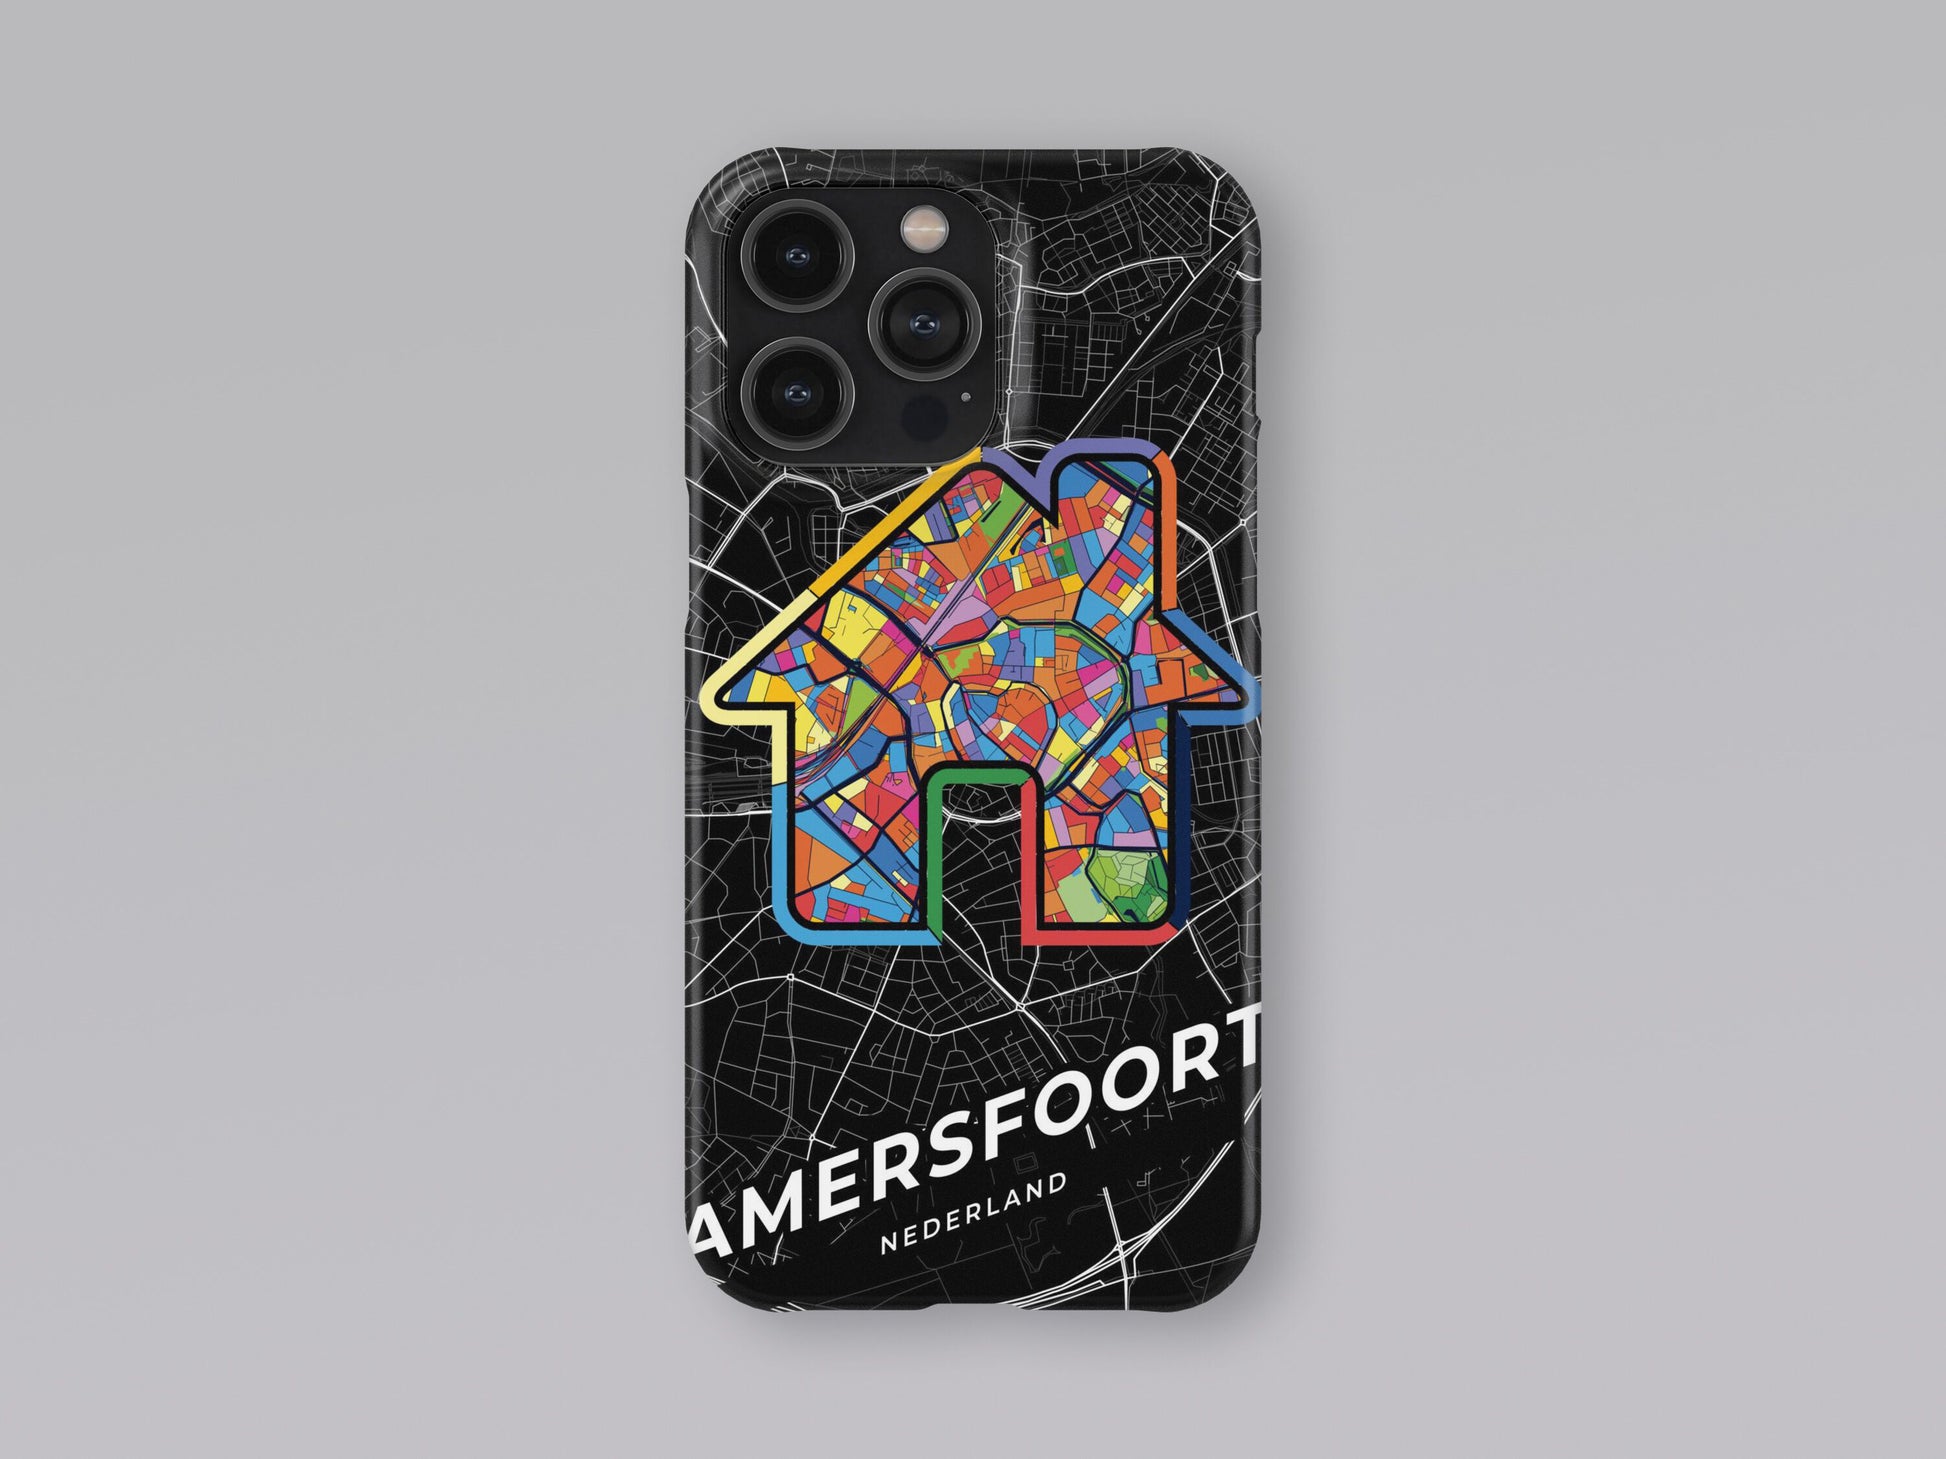 Amersfoort Netherlands slim phone case with colorful icon. Birthday, wedding or housewarming gift. Couple match cases. 3